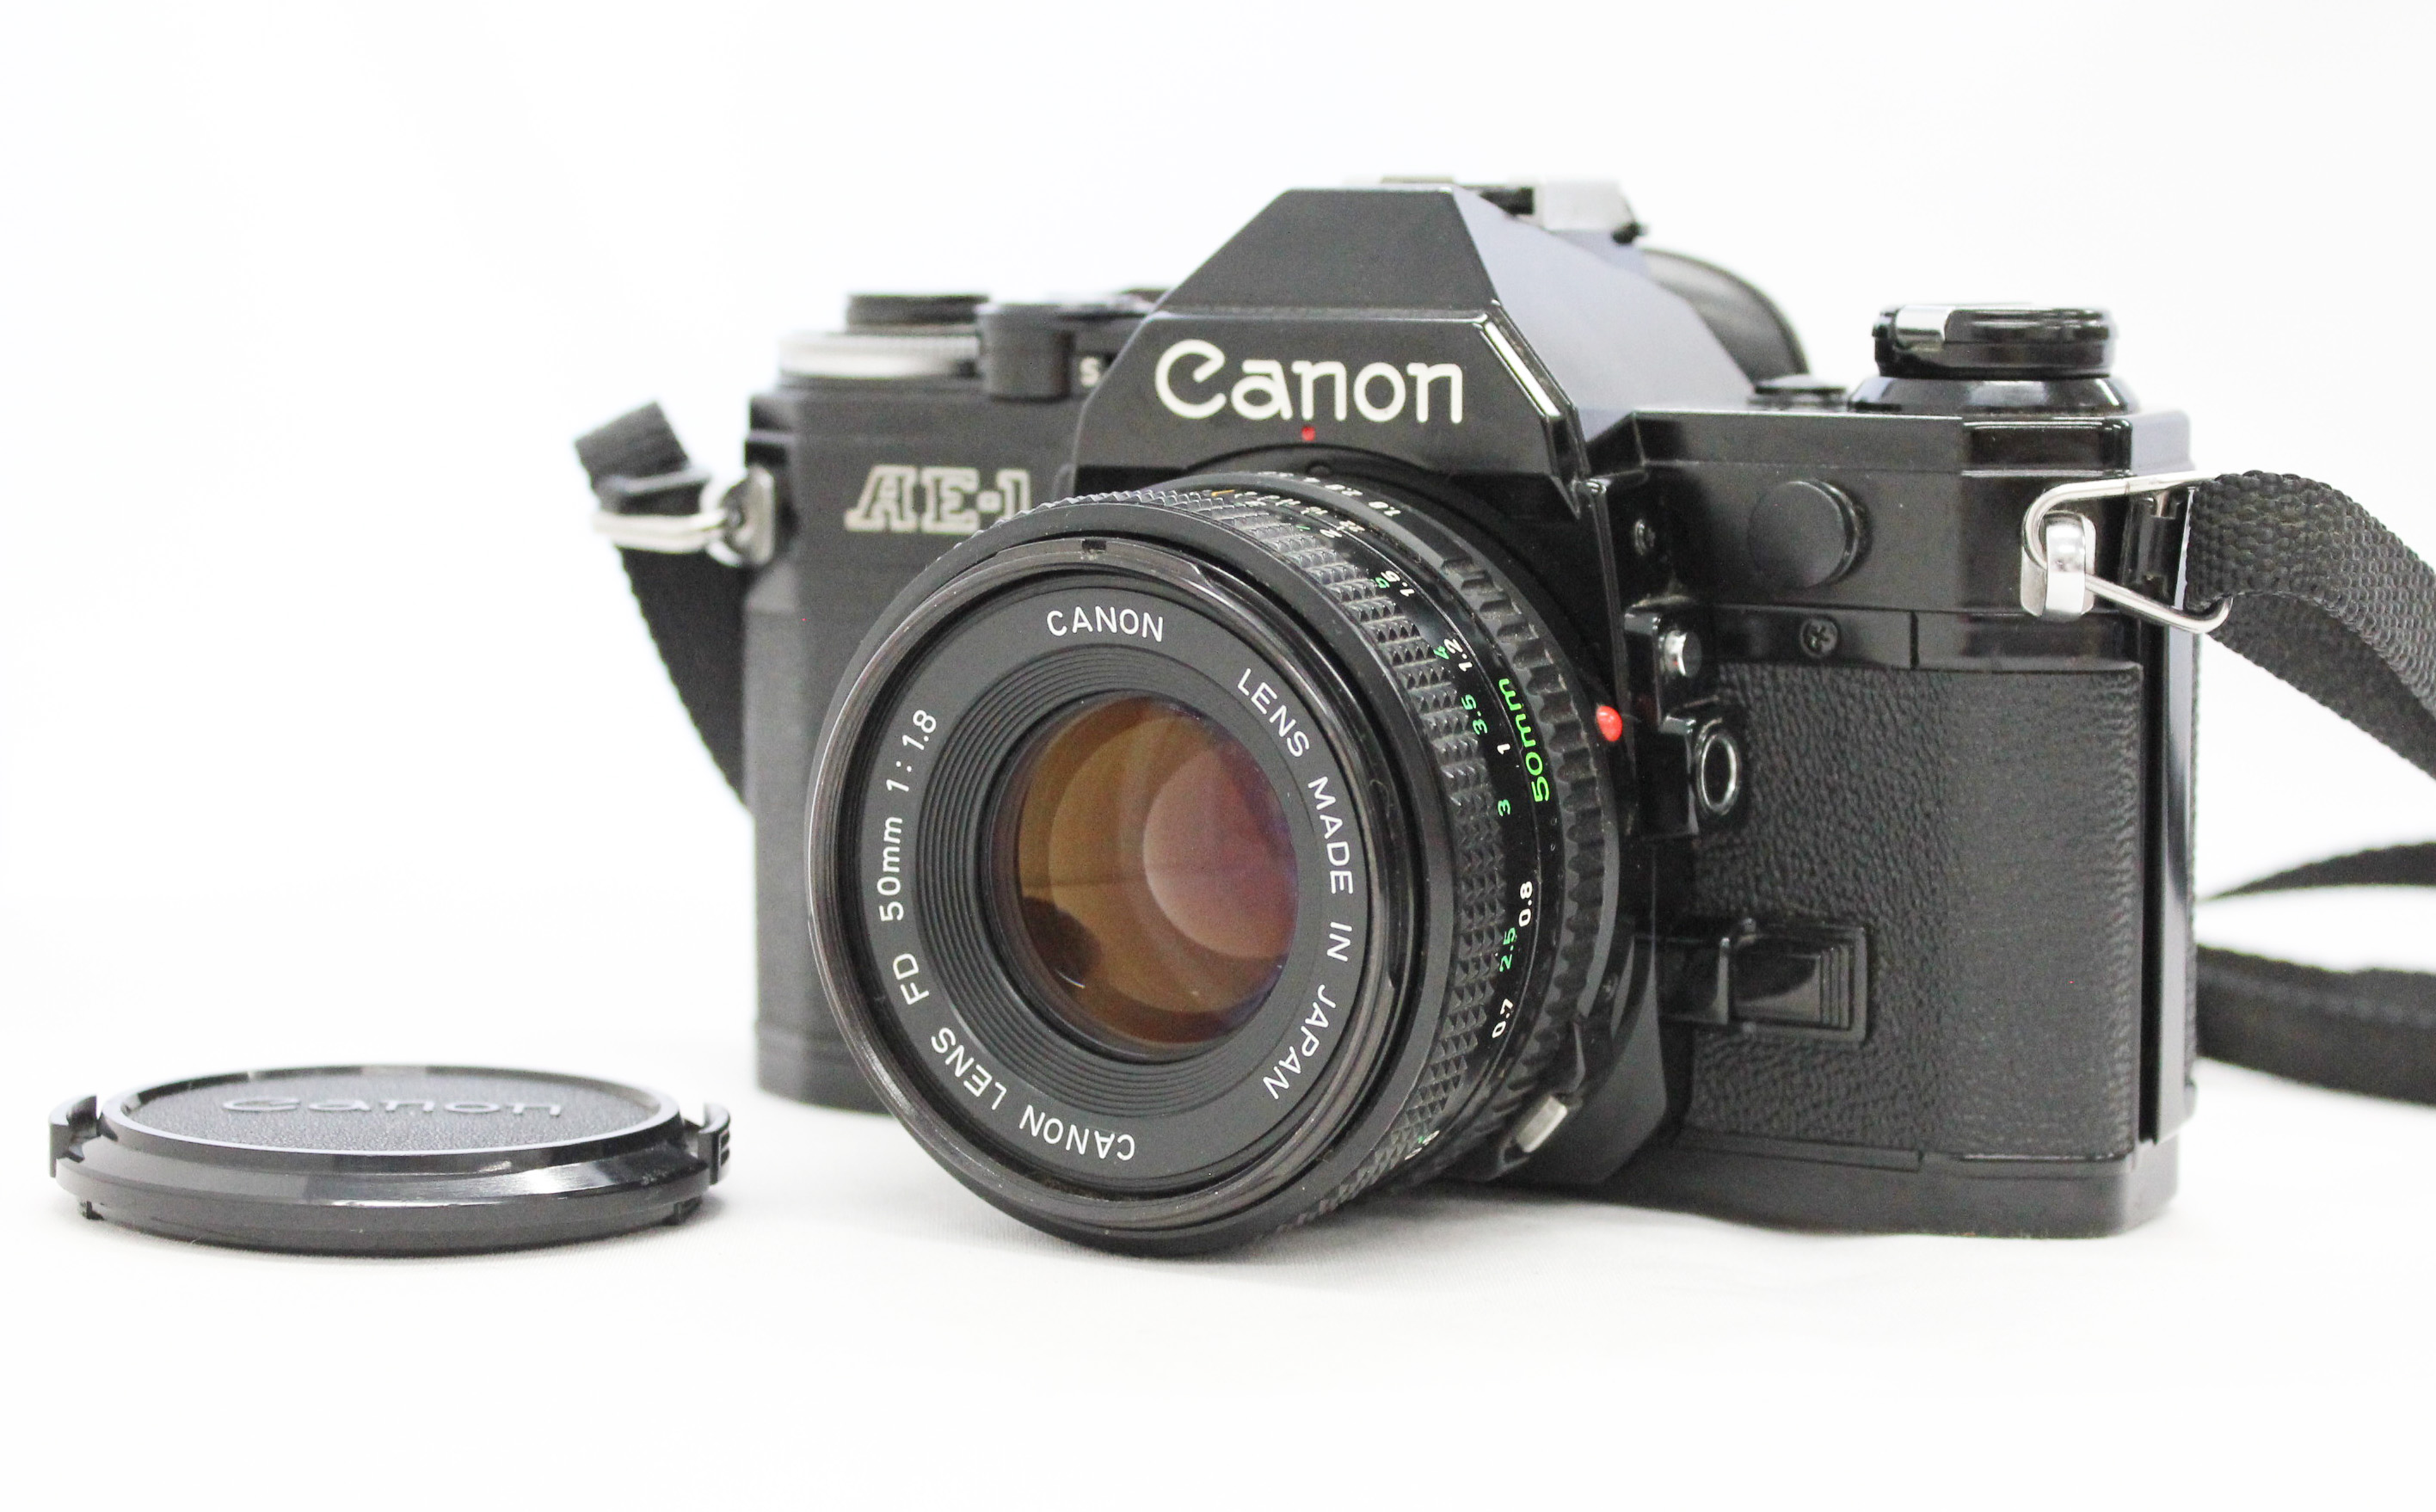 Japan Used Camera Shop | [Exc++++] Canon AE-1 35mm SLR Film Camera Black with New FD 50mm F/1.8 from Japan